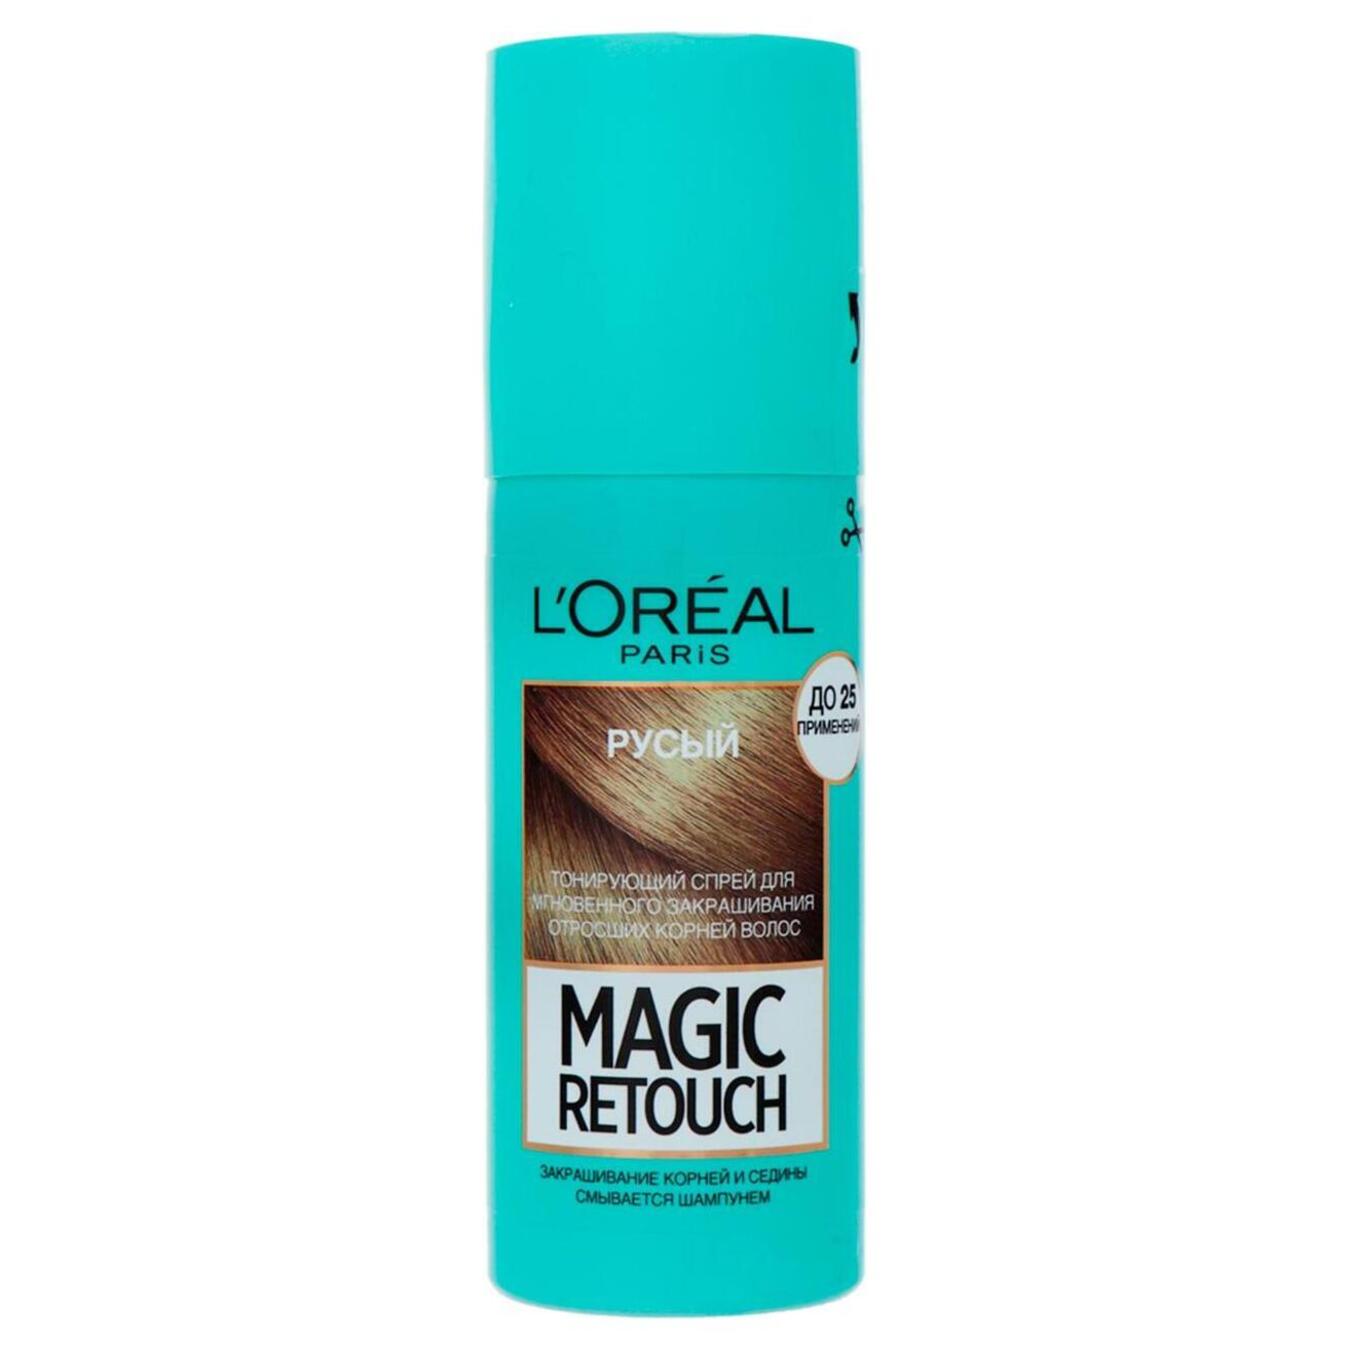 Tinting spray for instant masking of regrown hair roots L'oreal Magoc Retouch blond 75ml